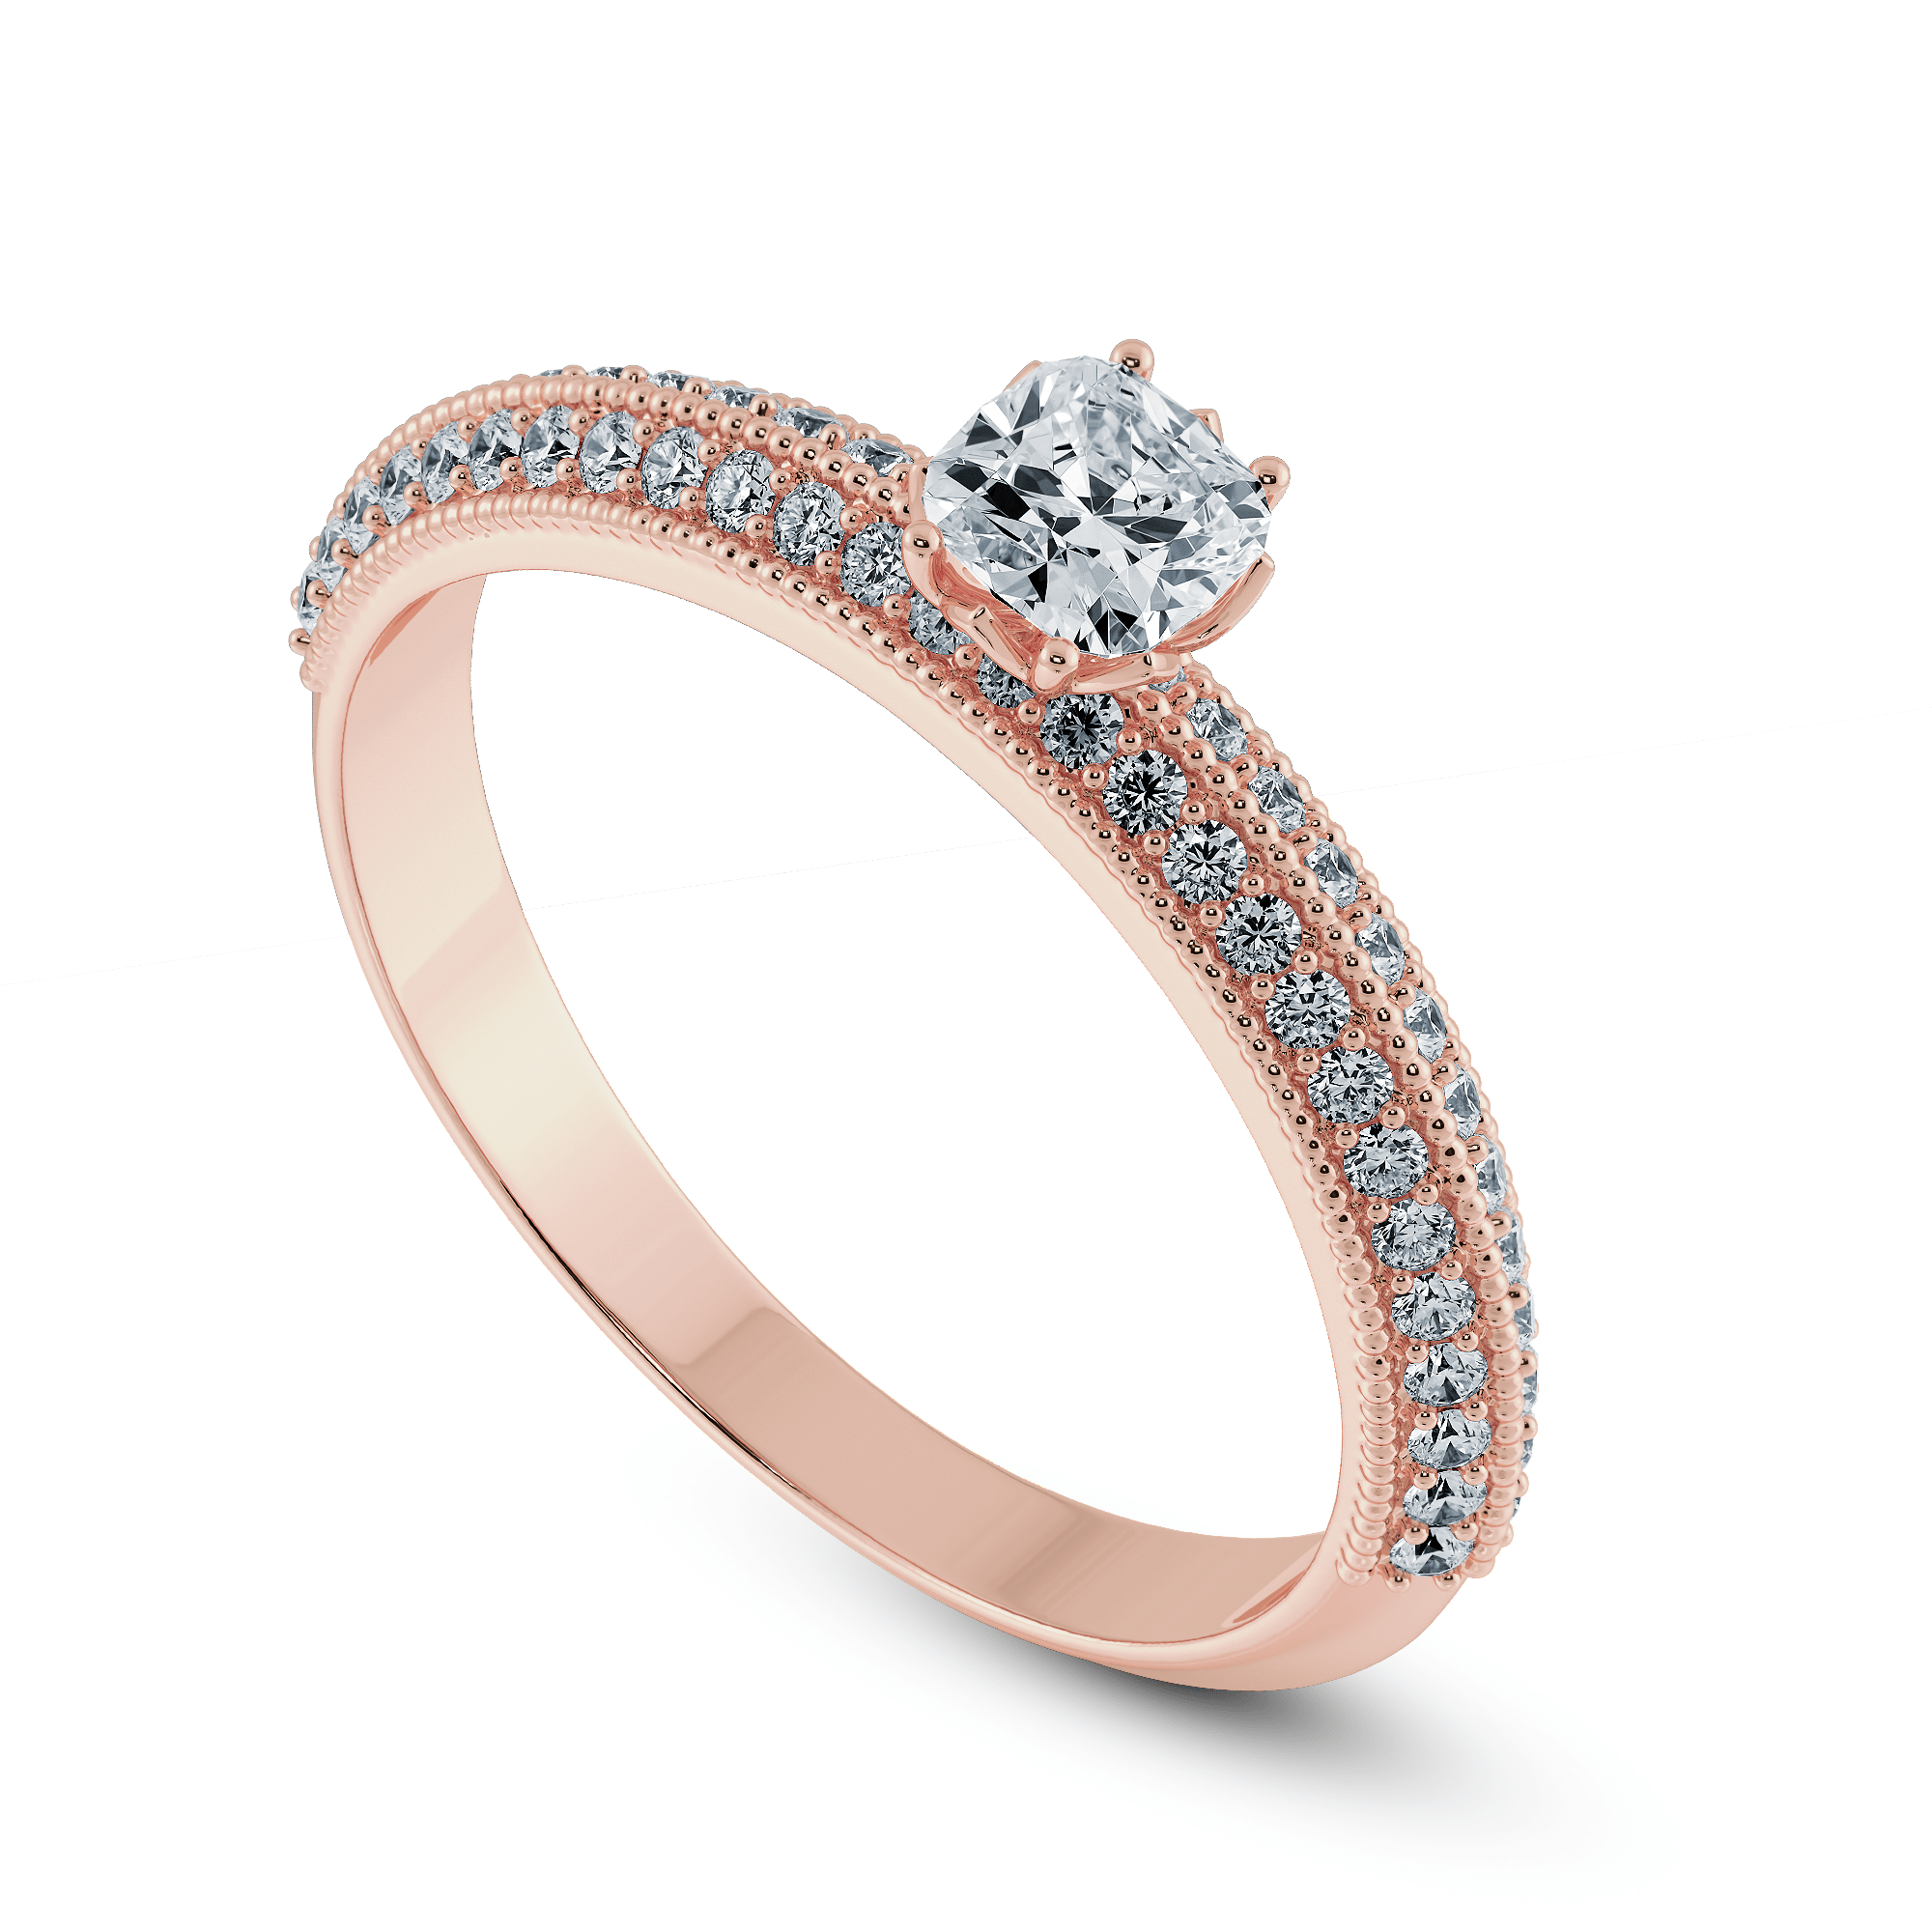 Buy Silver Shine Rose Gold Plated Elegant Classic Crystal Leaf Solitaire  Ring for Girls and women,wedding ring,jewelry,diamonds,fashion jewelry,couple  rings. Online from SilverShine